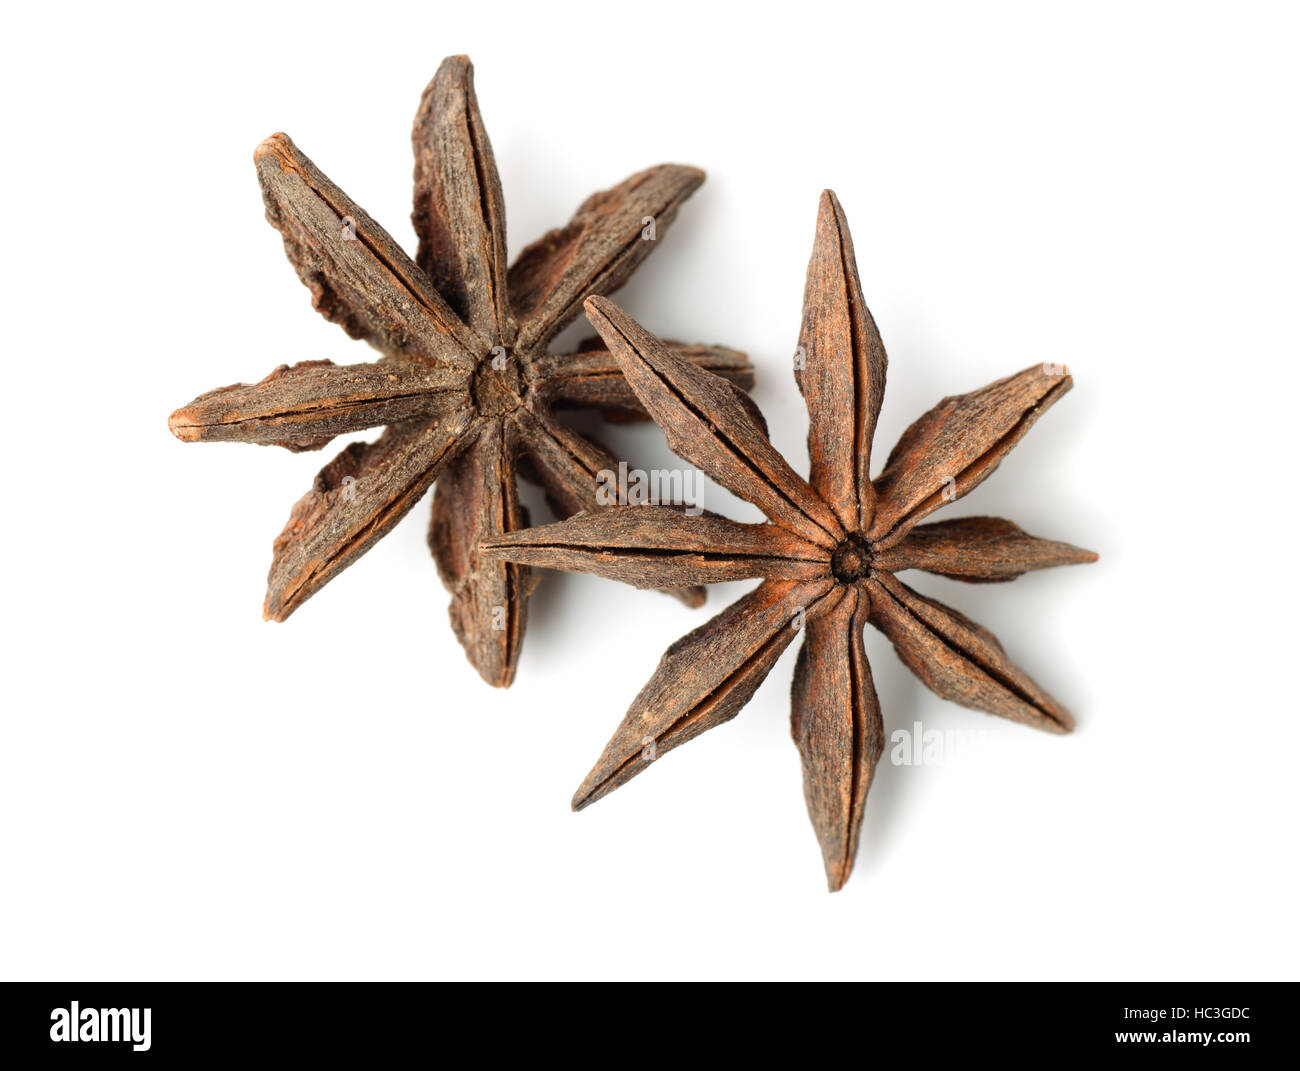 Top view of star anise fruits isolated on white Stock Photo